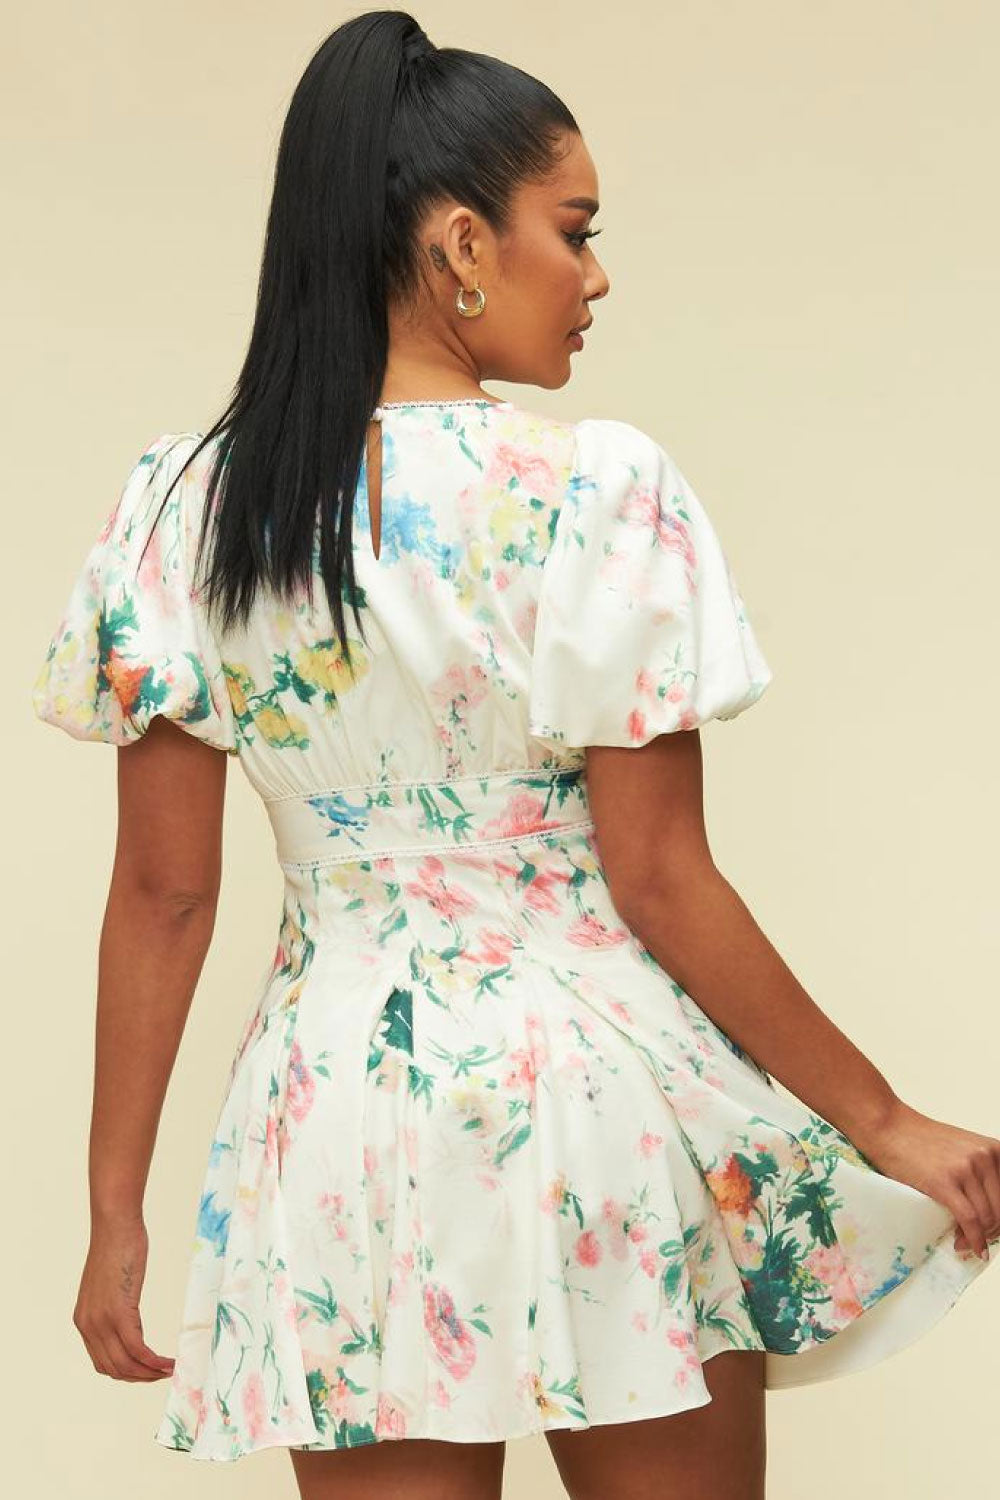 Image of the back of the Spring Dream Dress on a model.